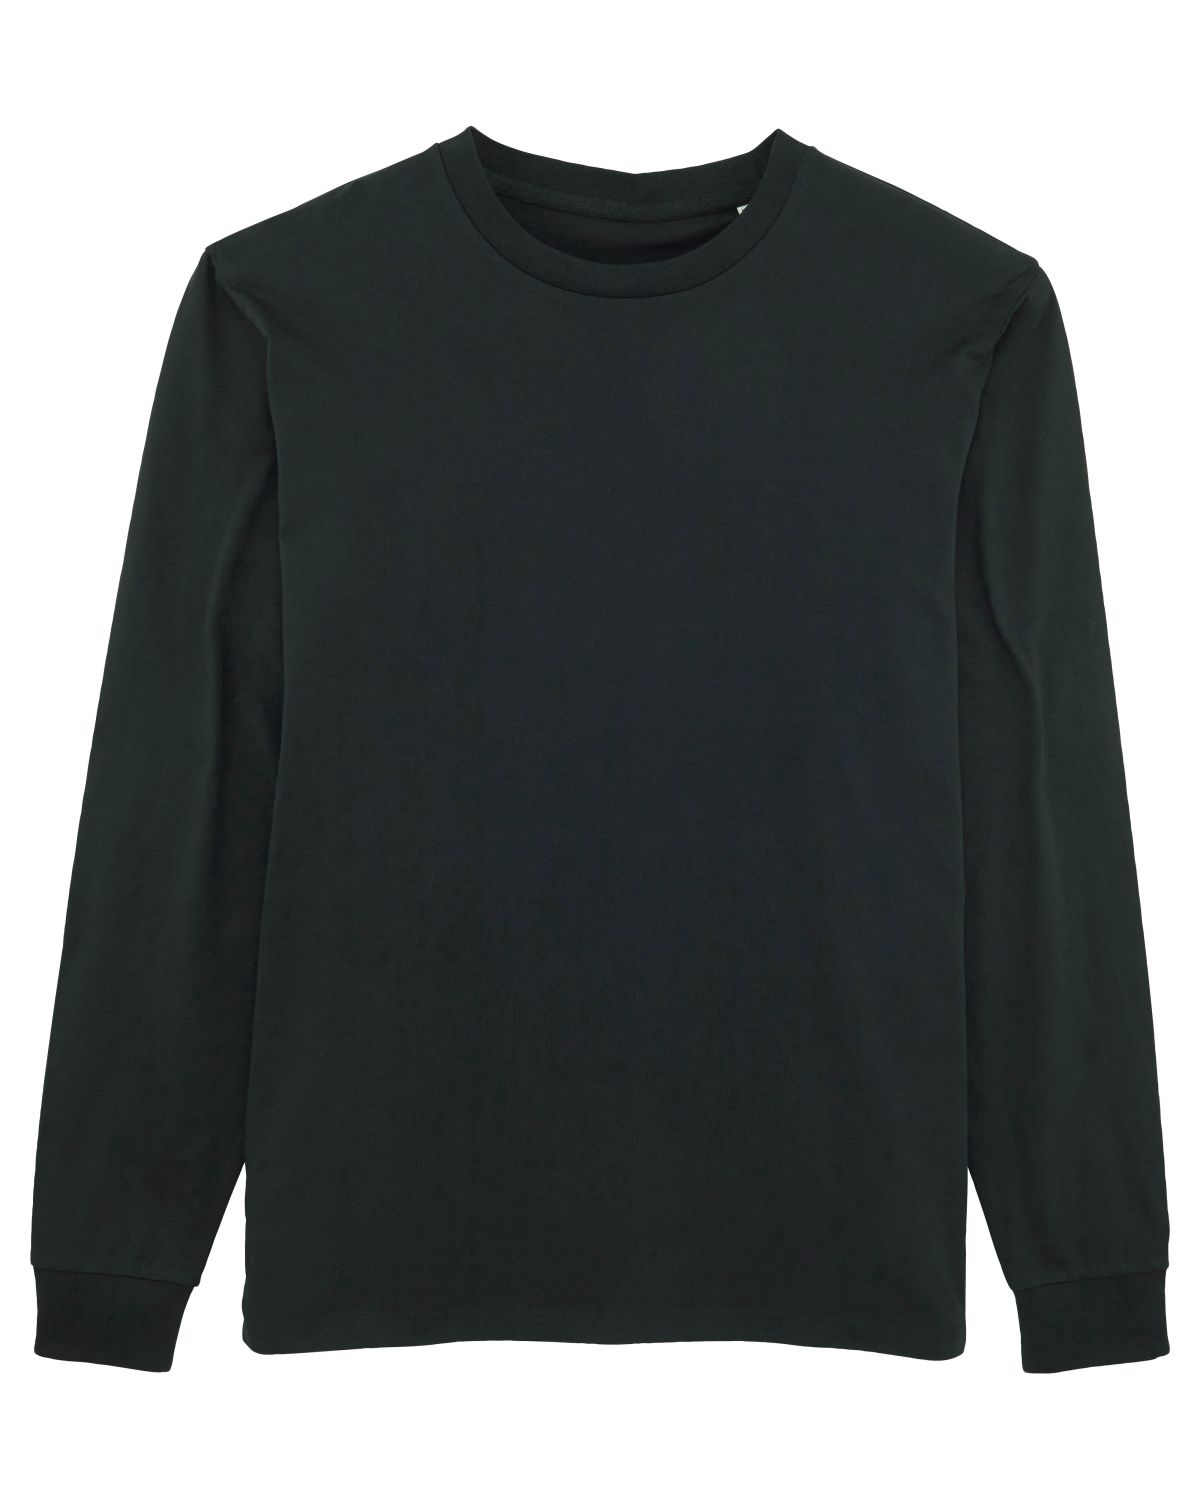 Customize your own sustainable long-sleeve t-shirt made of 100% GOTS-certified organic cottton